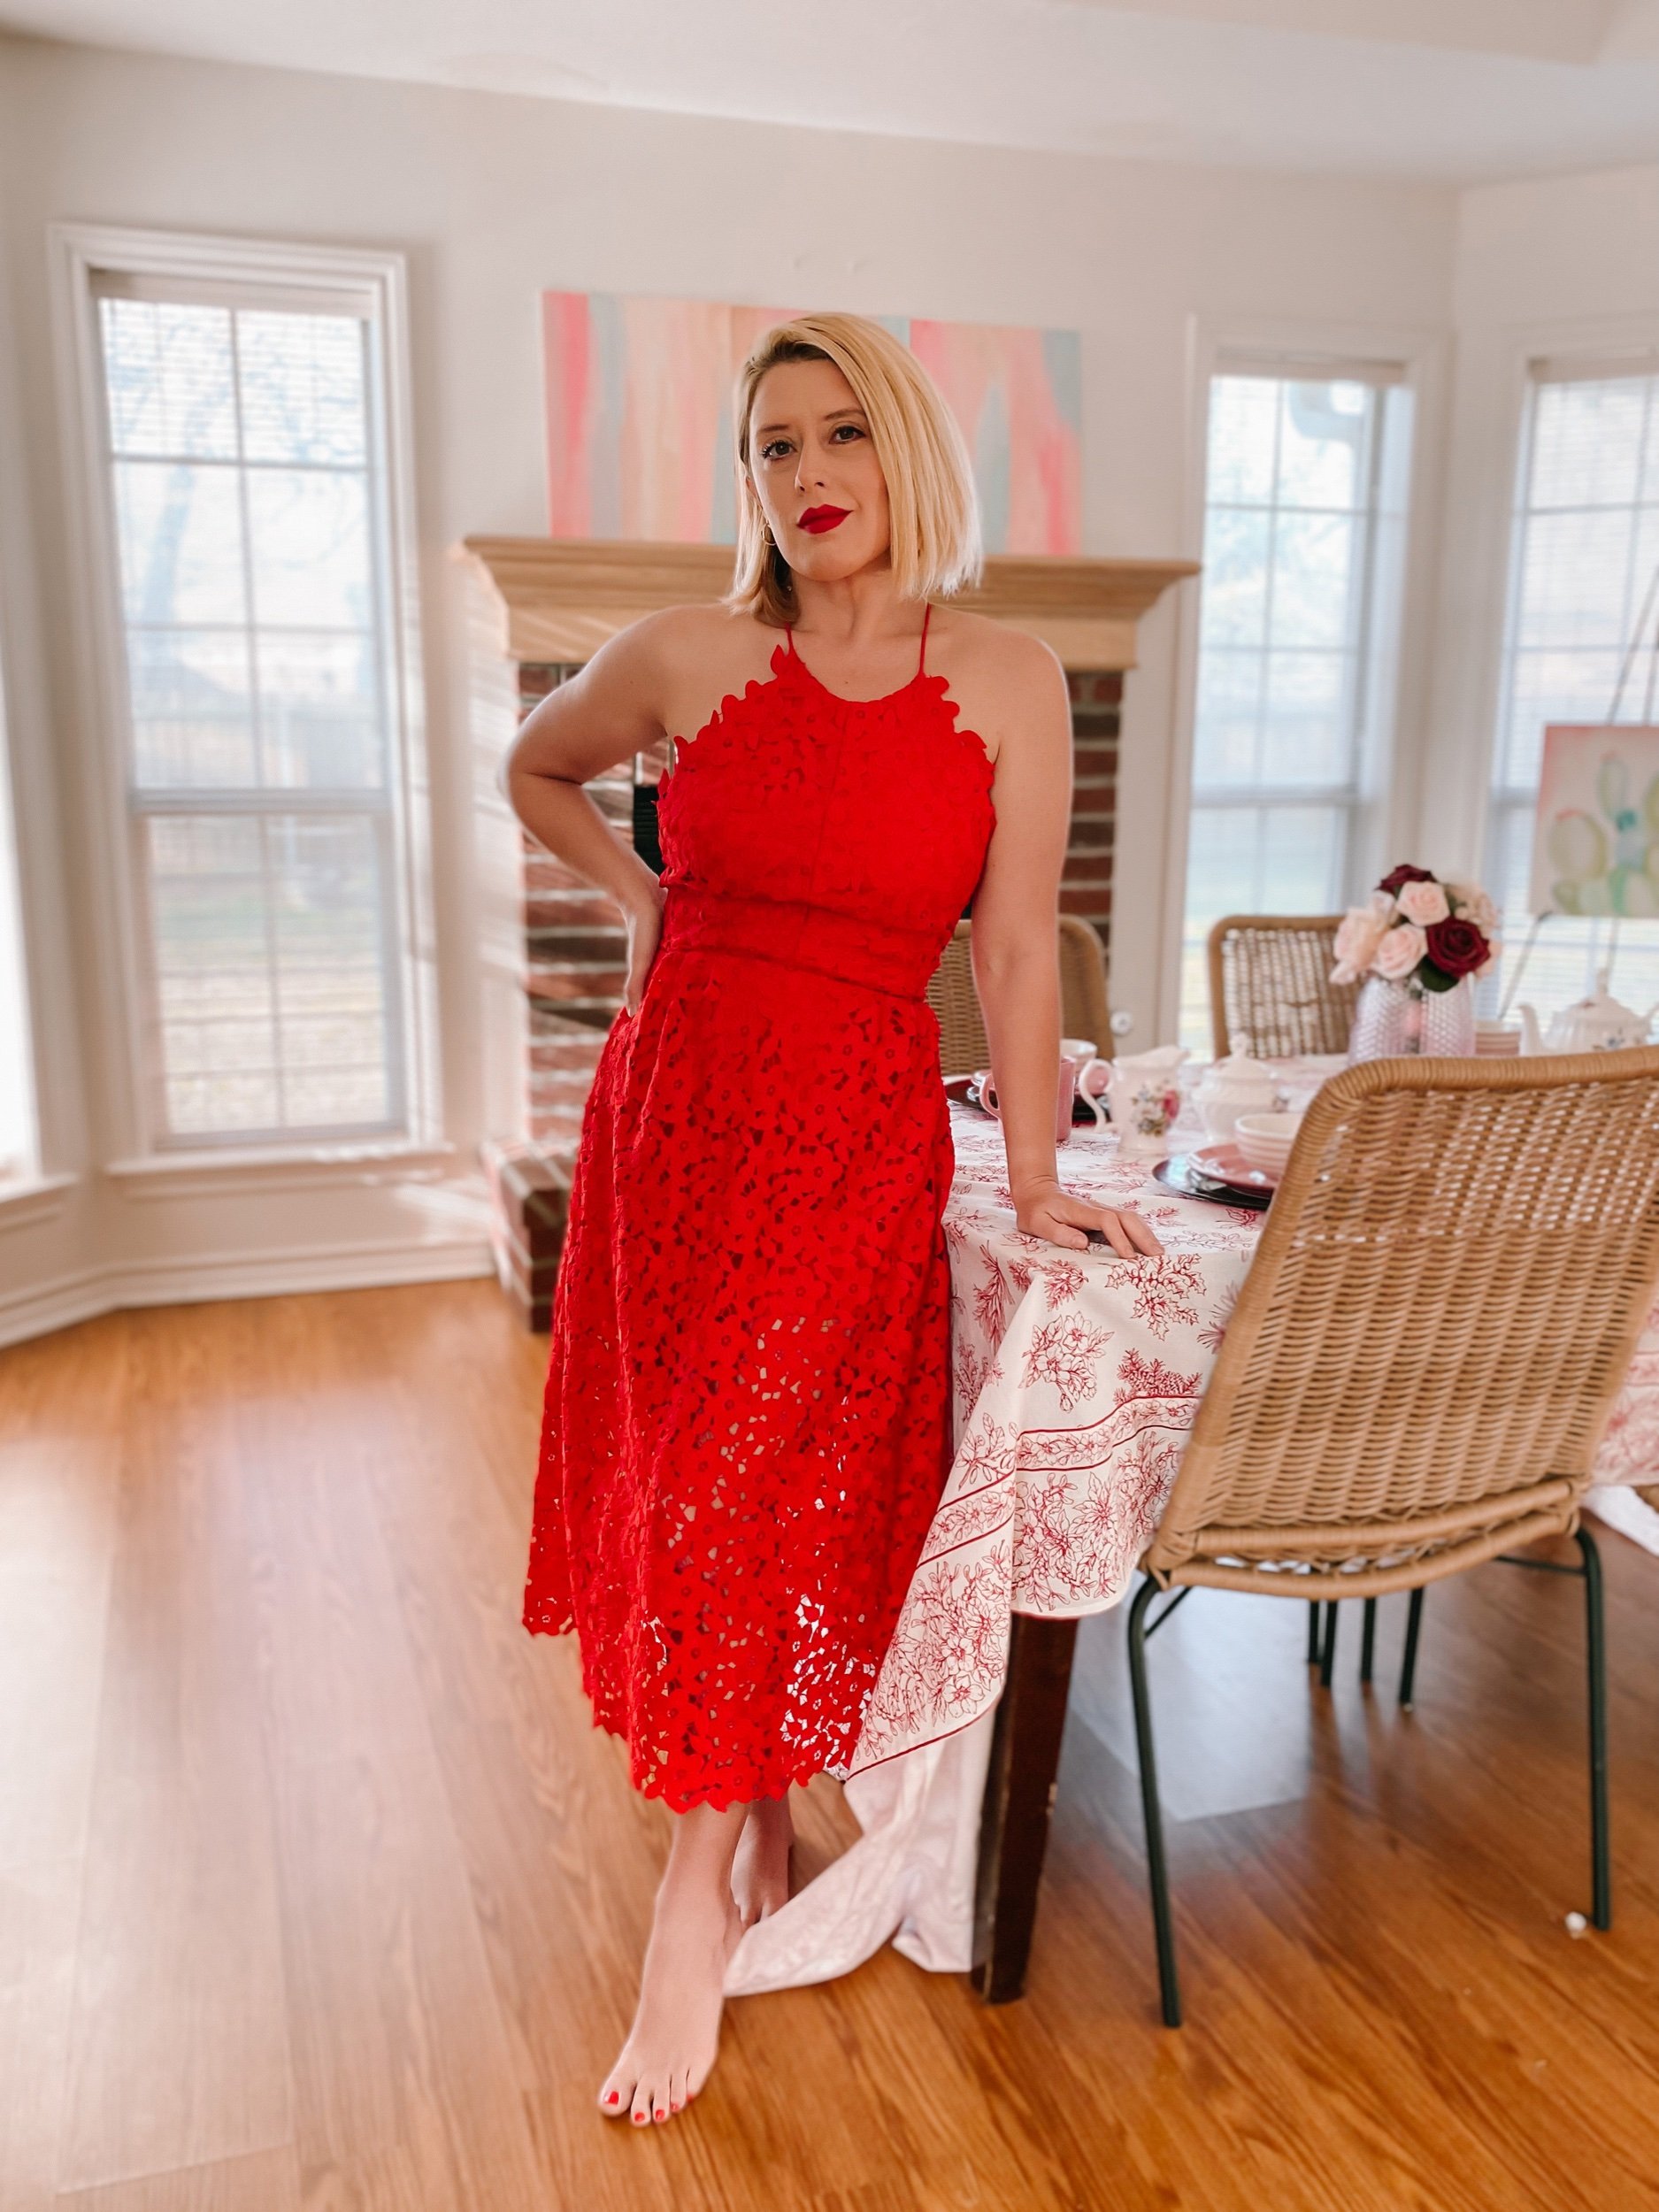 Three Heel Clicks - Valentine's Day Stay at Home Outfit and Date Ideas